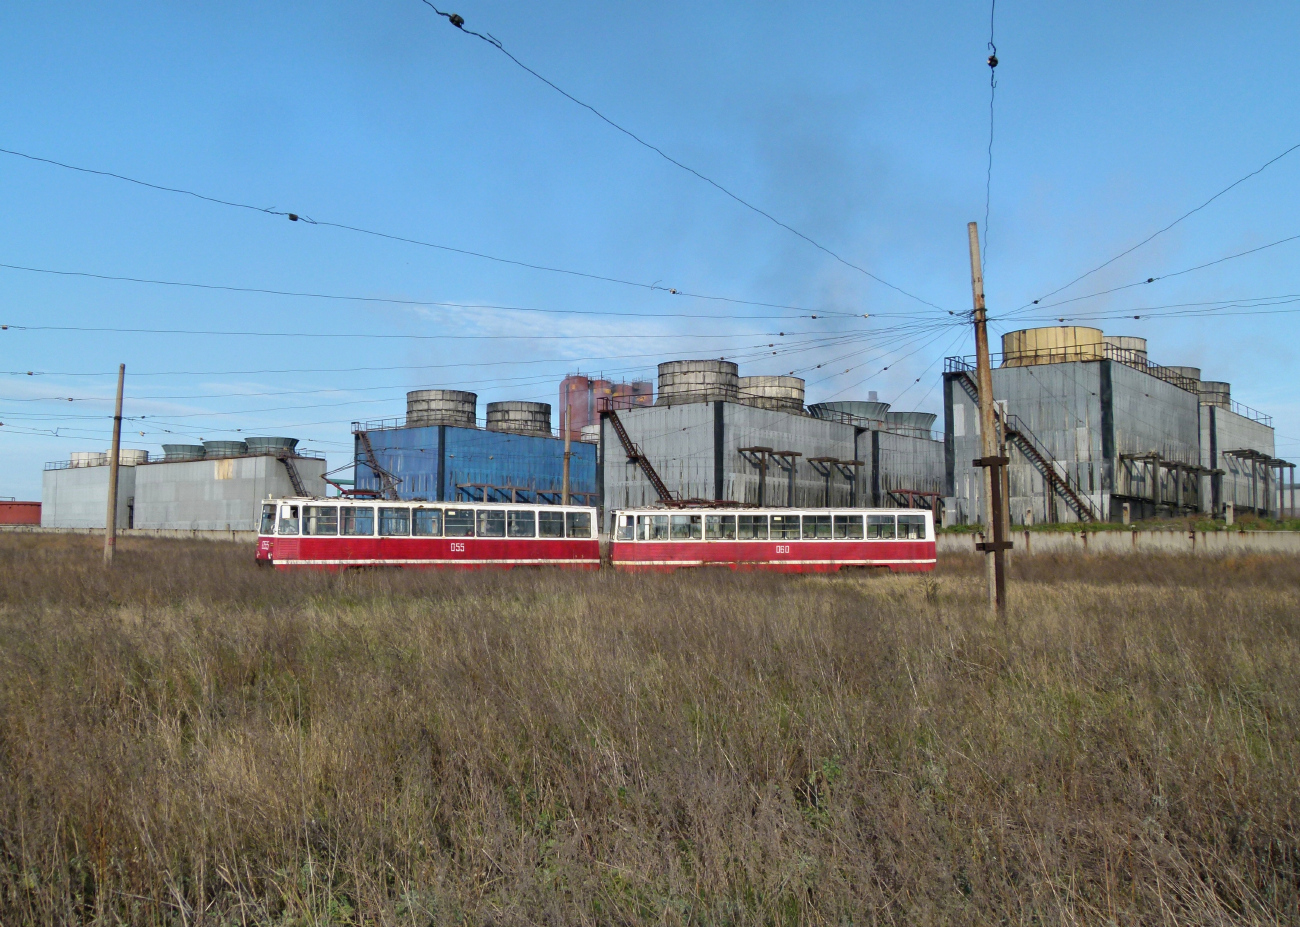 Avdiivka, 71-605 (KTM-5M3) č. 055; Avdiivka, 71-605 (KTM-5M3) č. 060; Avdiivka — 13.11.2012 — Fantrip with EMU 055+060; Avdiivka — Lines and Infrastructure